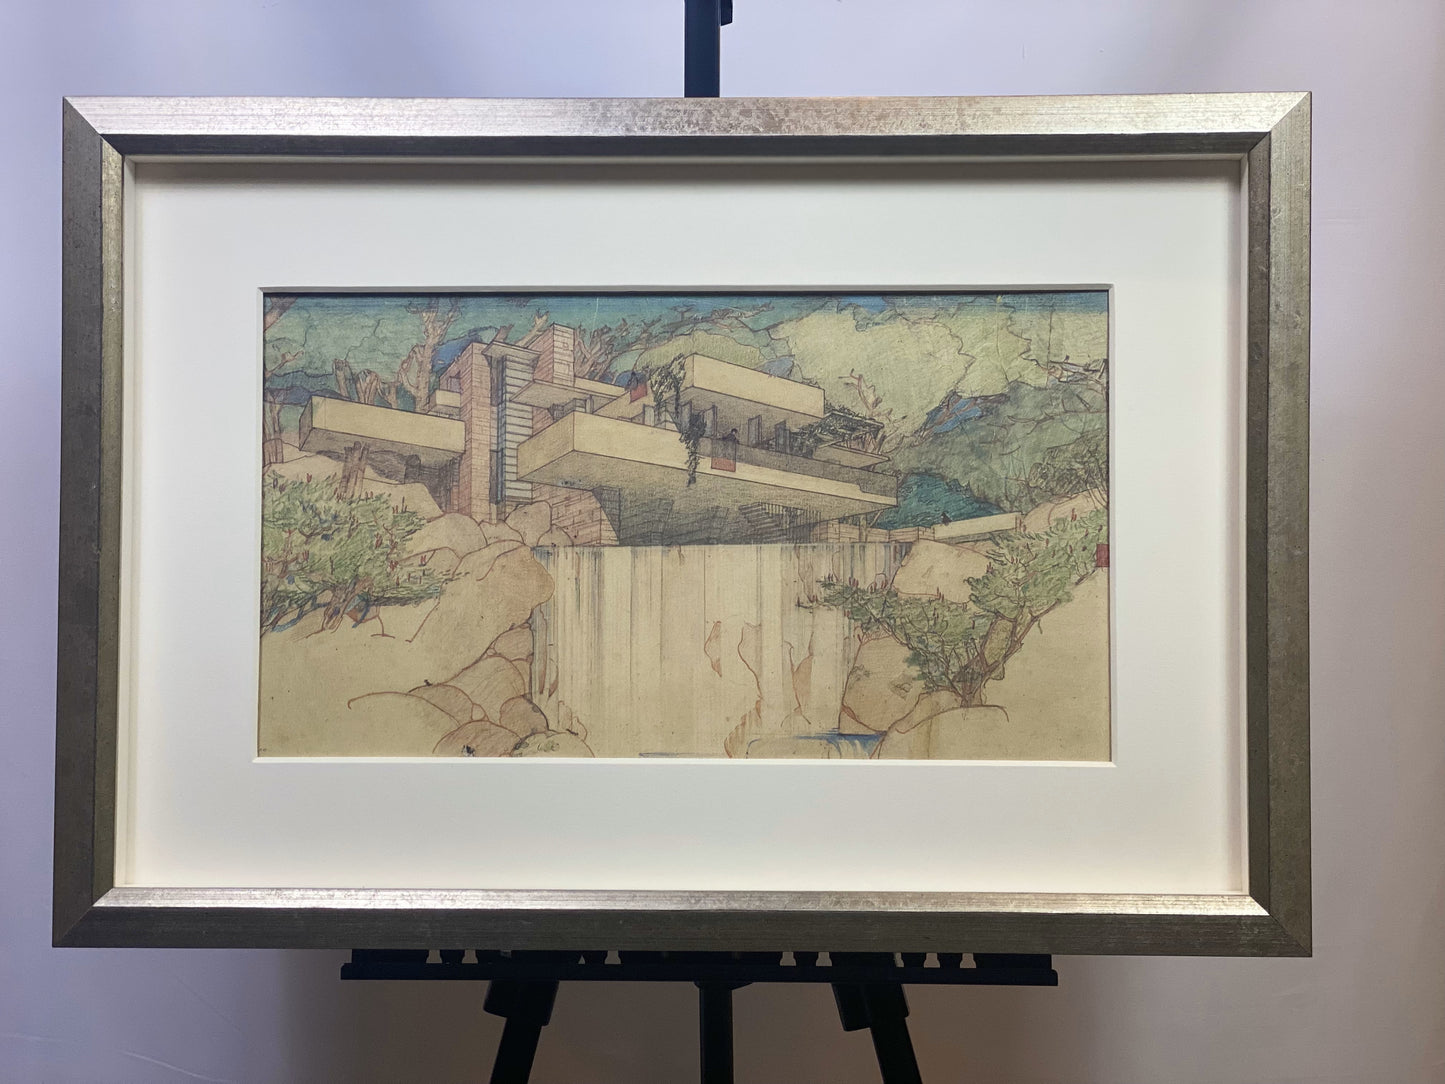 Frank Lloyd WRIGHT Limited Edition Lithograph "Falling Water" 375/500